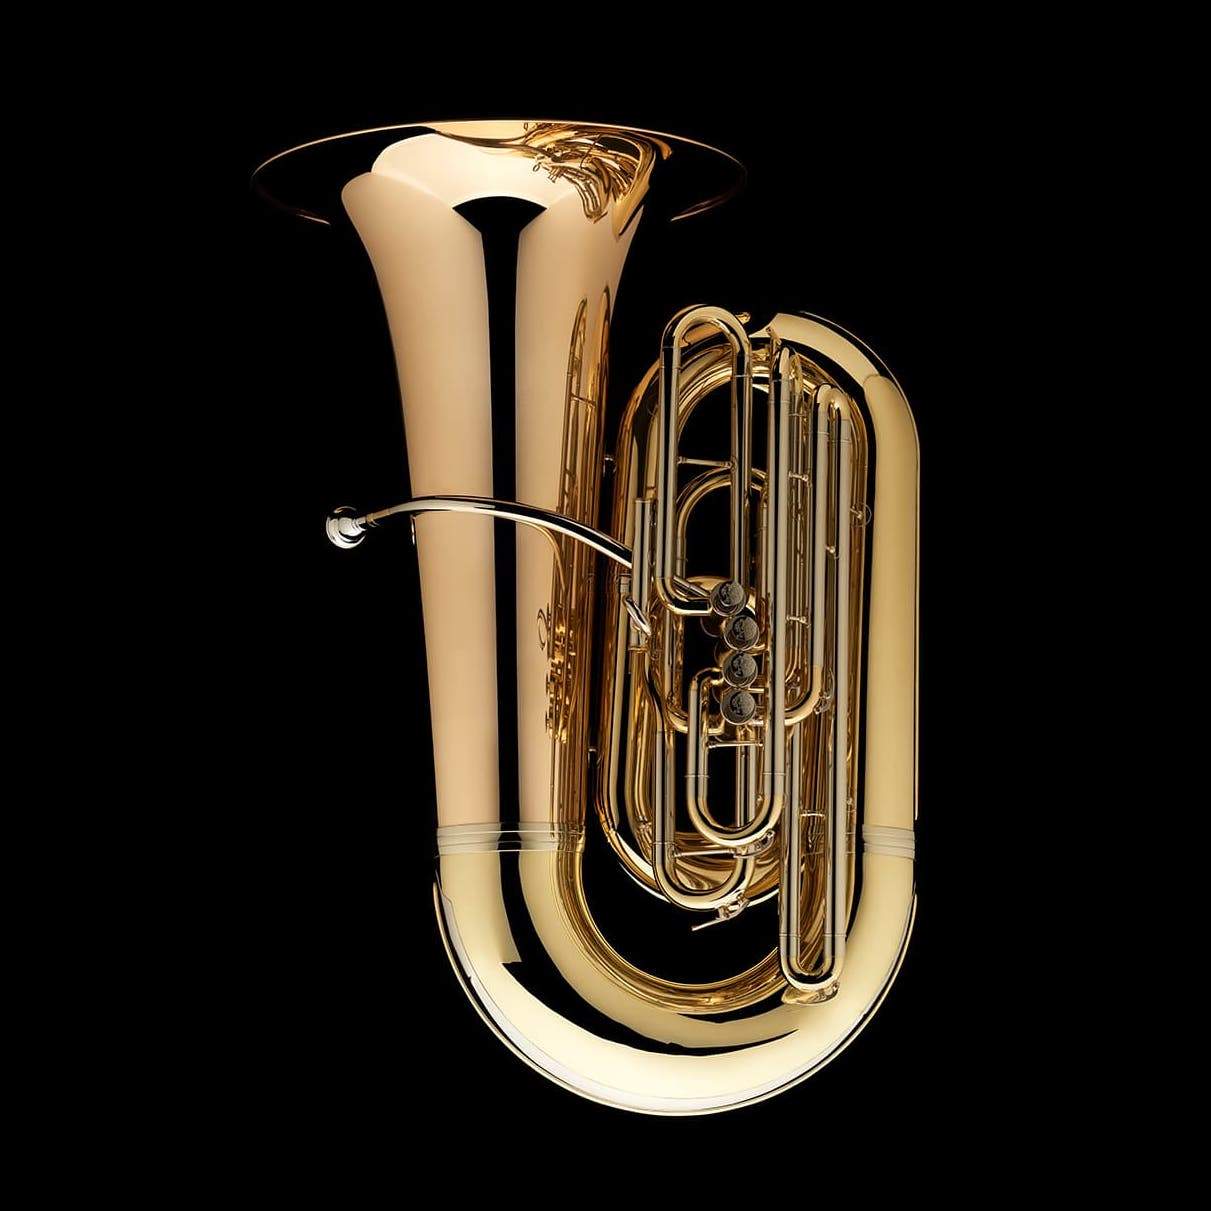 An image of a BBb 6/4 Front-Piston Tuba "Grand" from Wessex Tubas